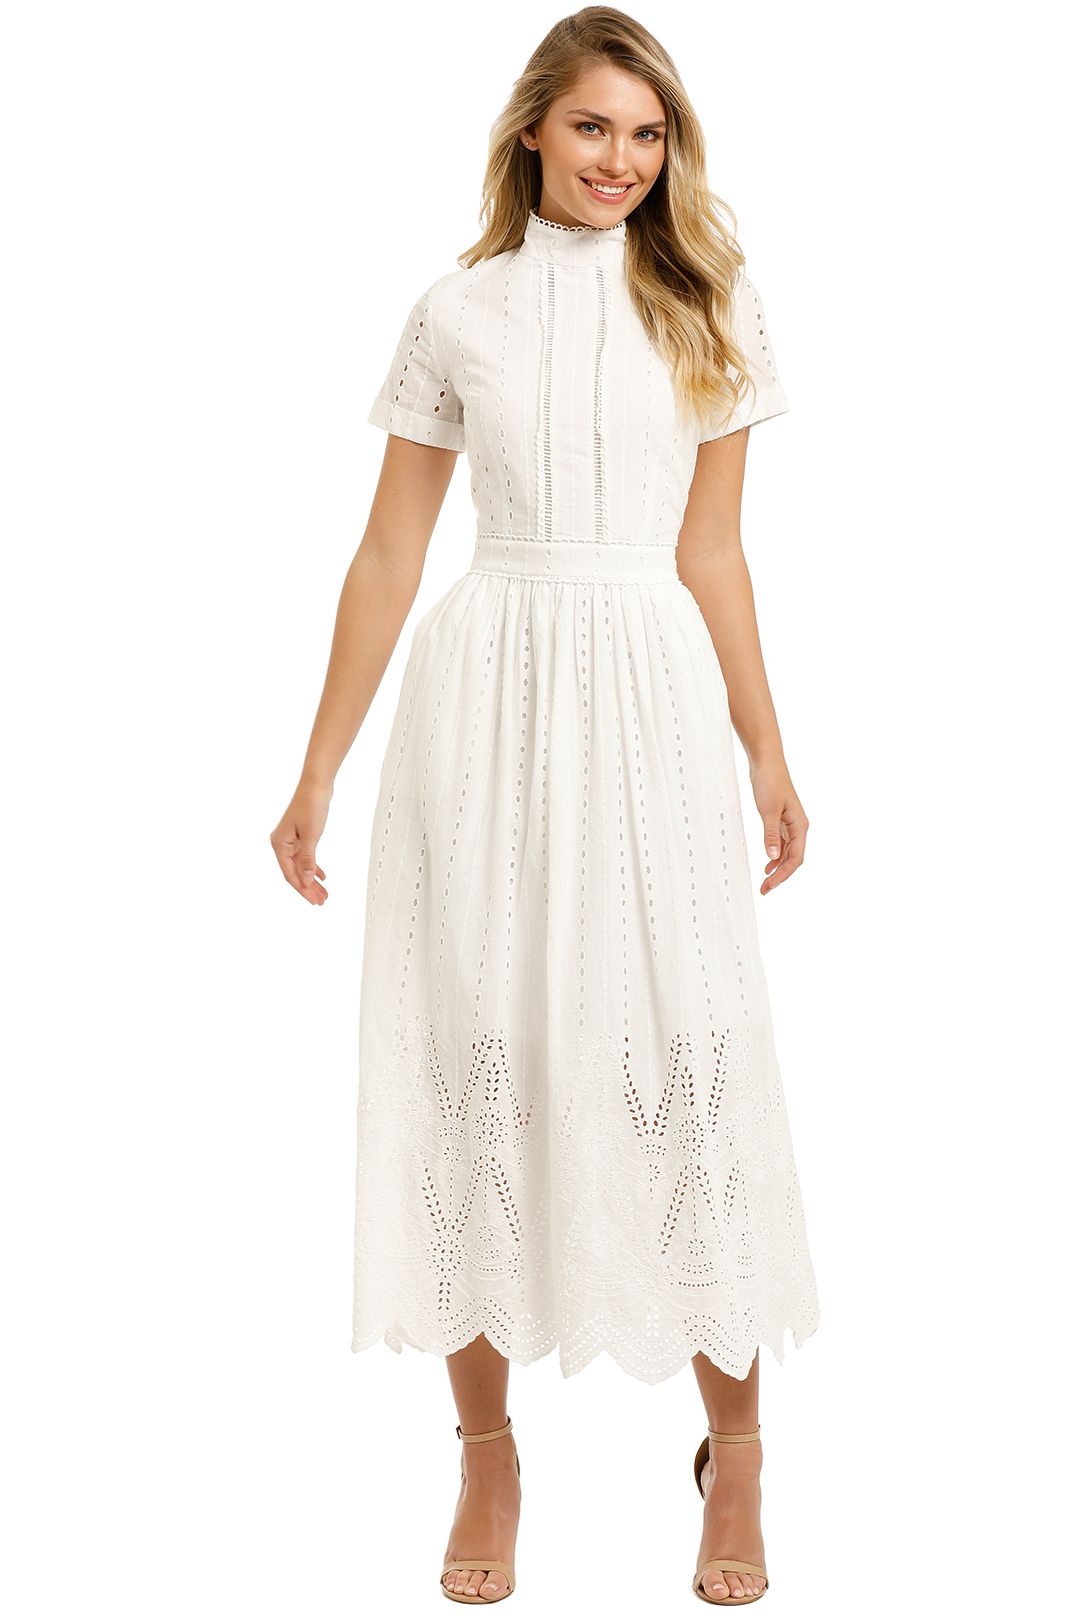 We-Are-Kindred-Lola-High-Neck-Dress-White-Front